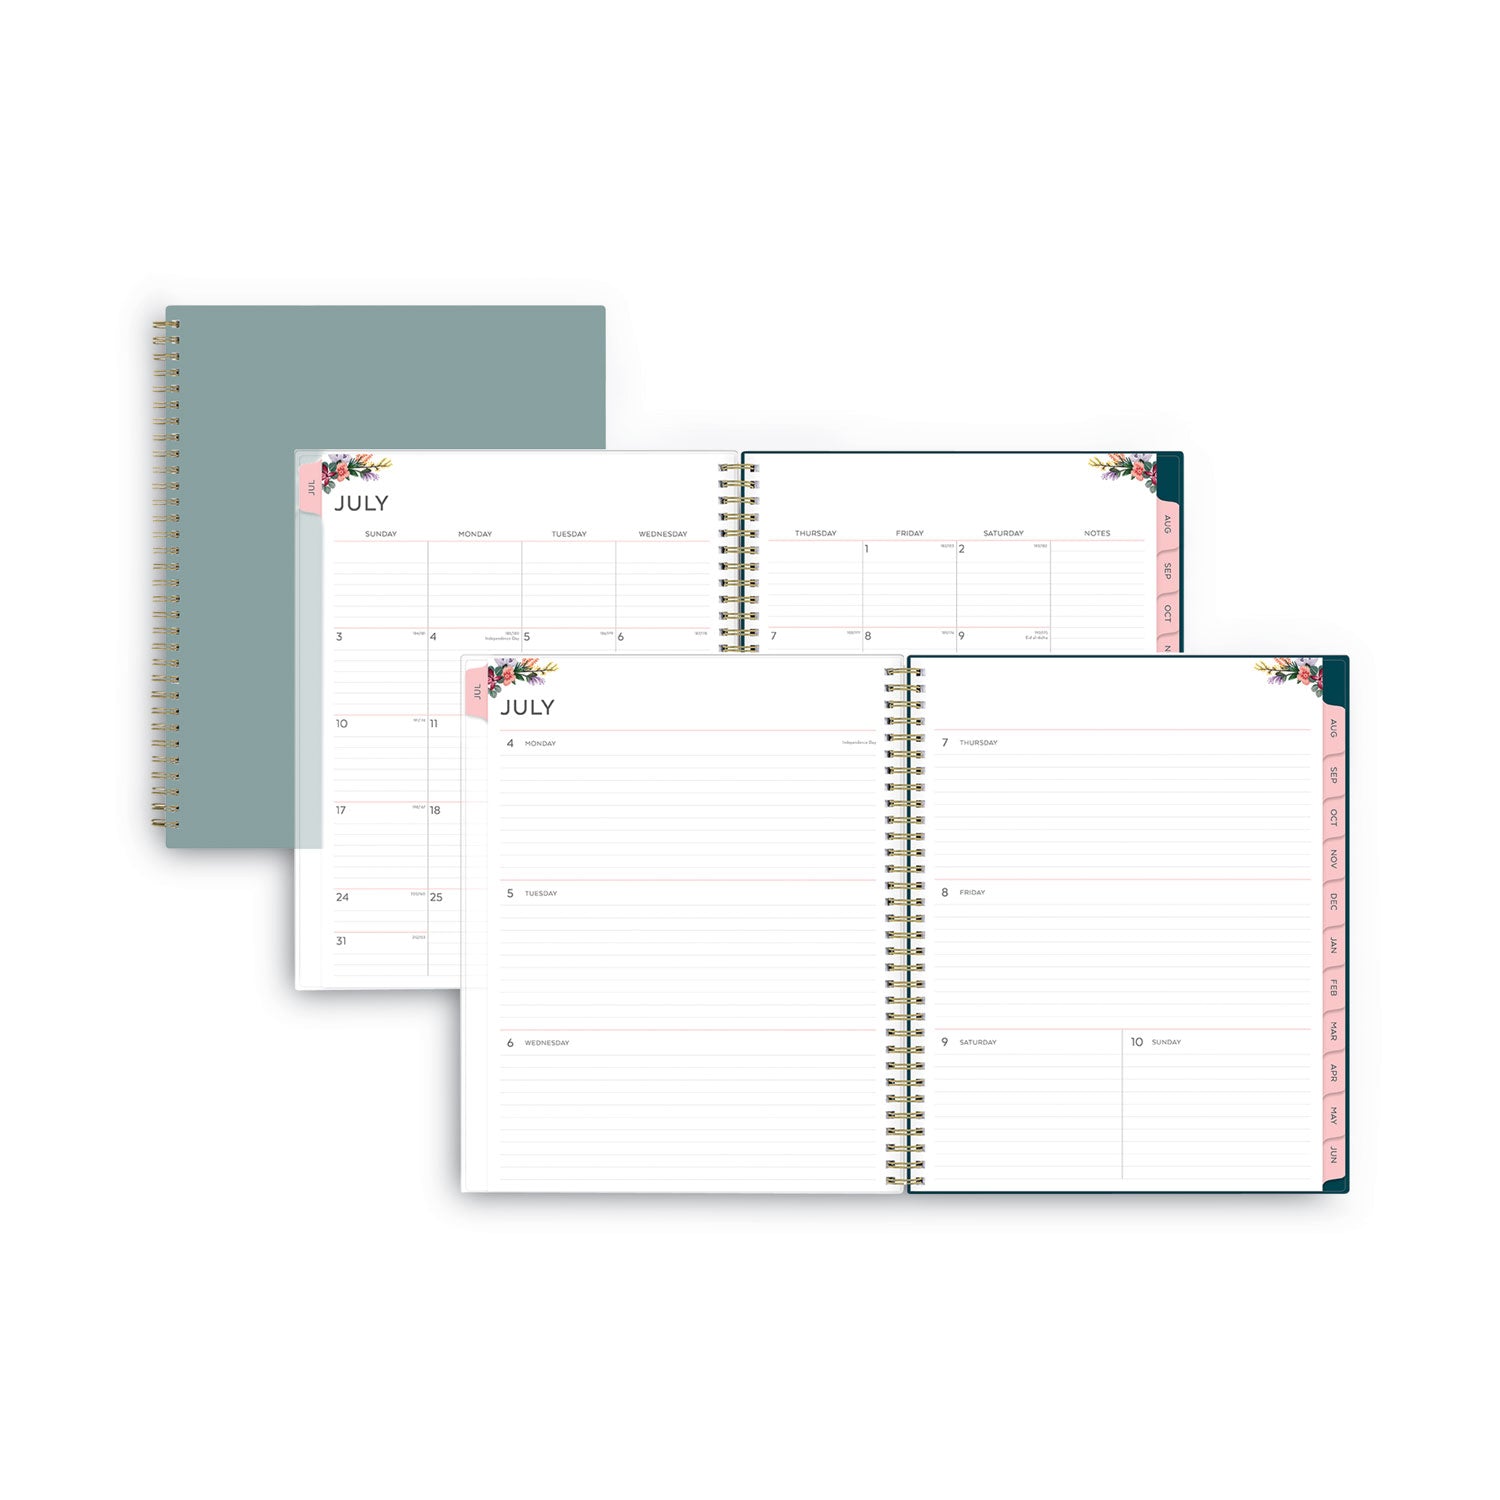 greta-academic-year-weekly-monthly-planner-greta-floral-artwork-115-x-8-green-cover-12-month-july-june-2022-2023_bls136479 - 1